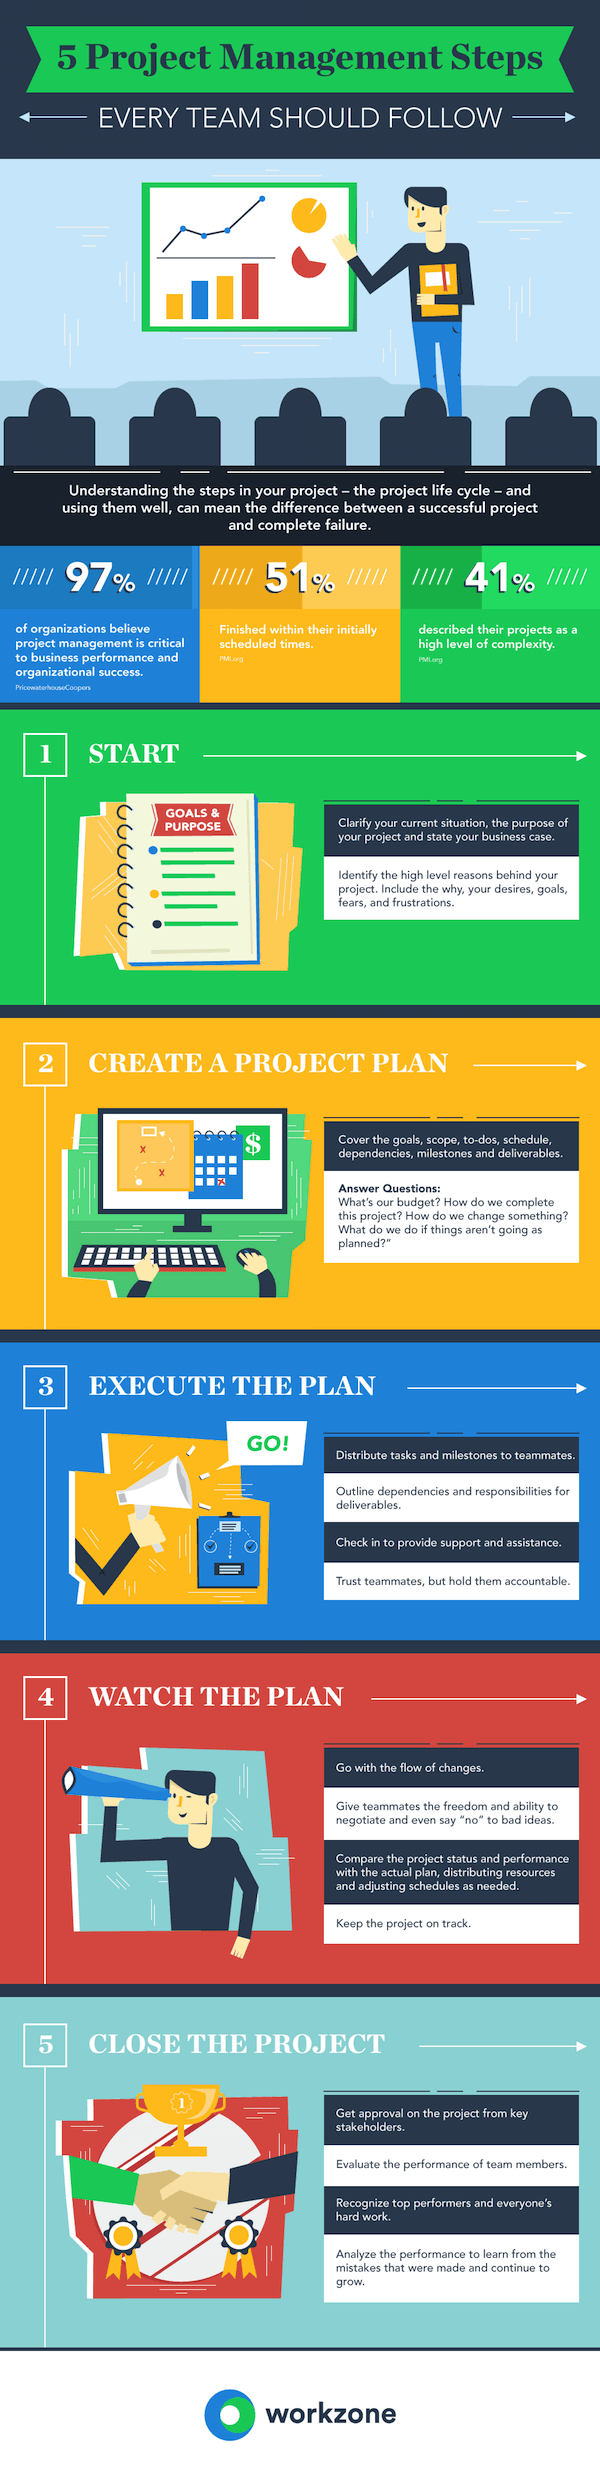 project management steps infographic